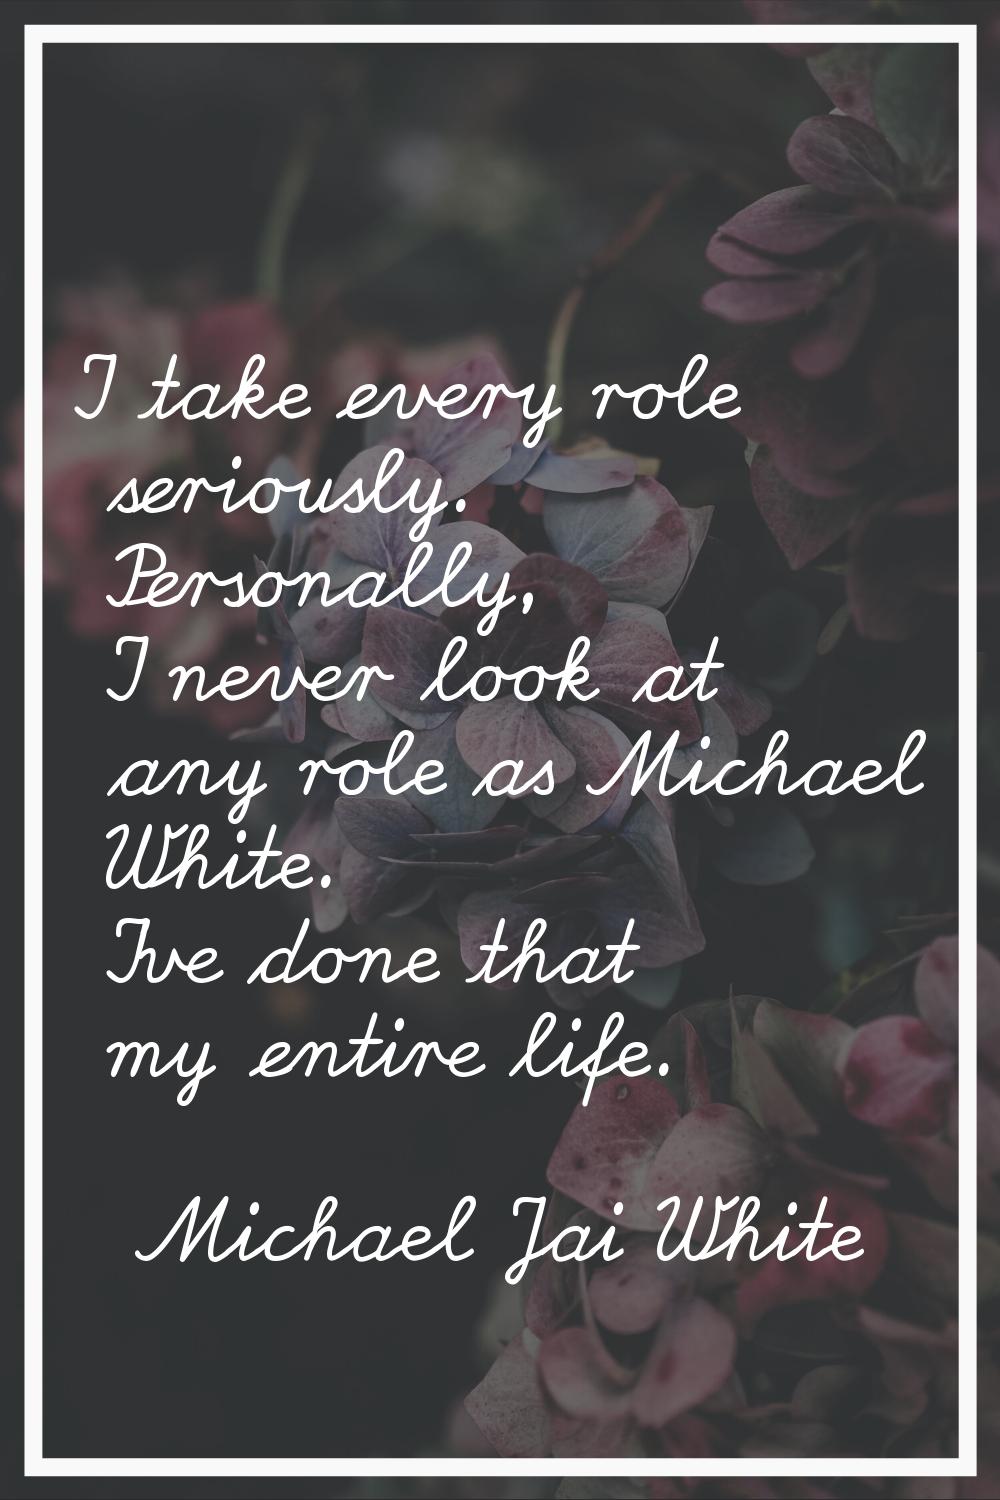 I take every role seriously. Personally, I never look at any role as Michael White. I've done that 